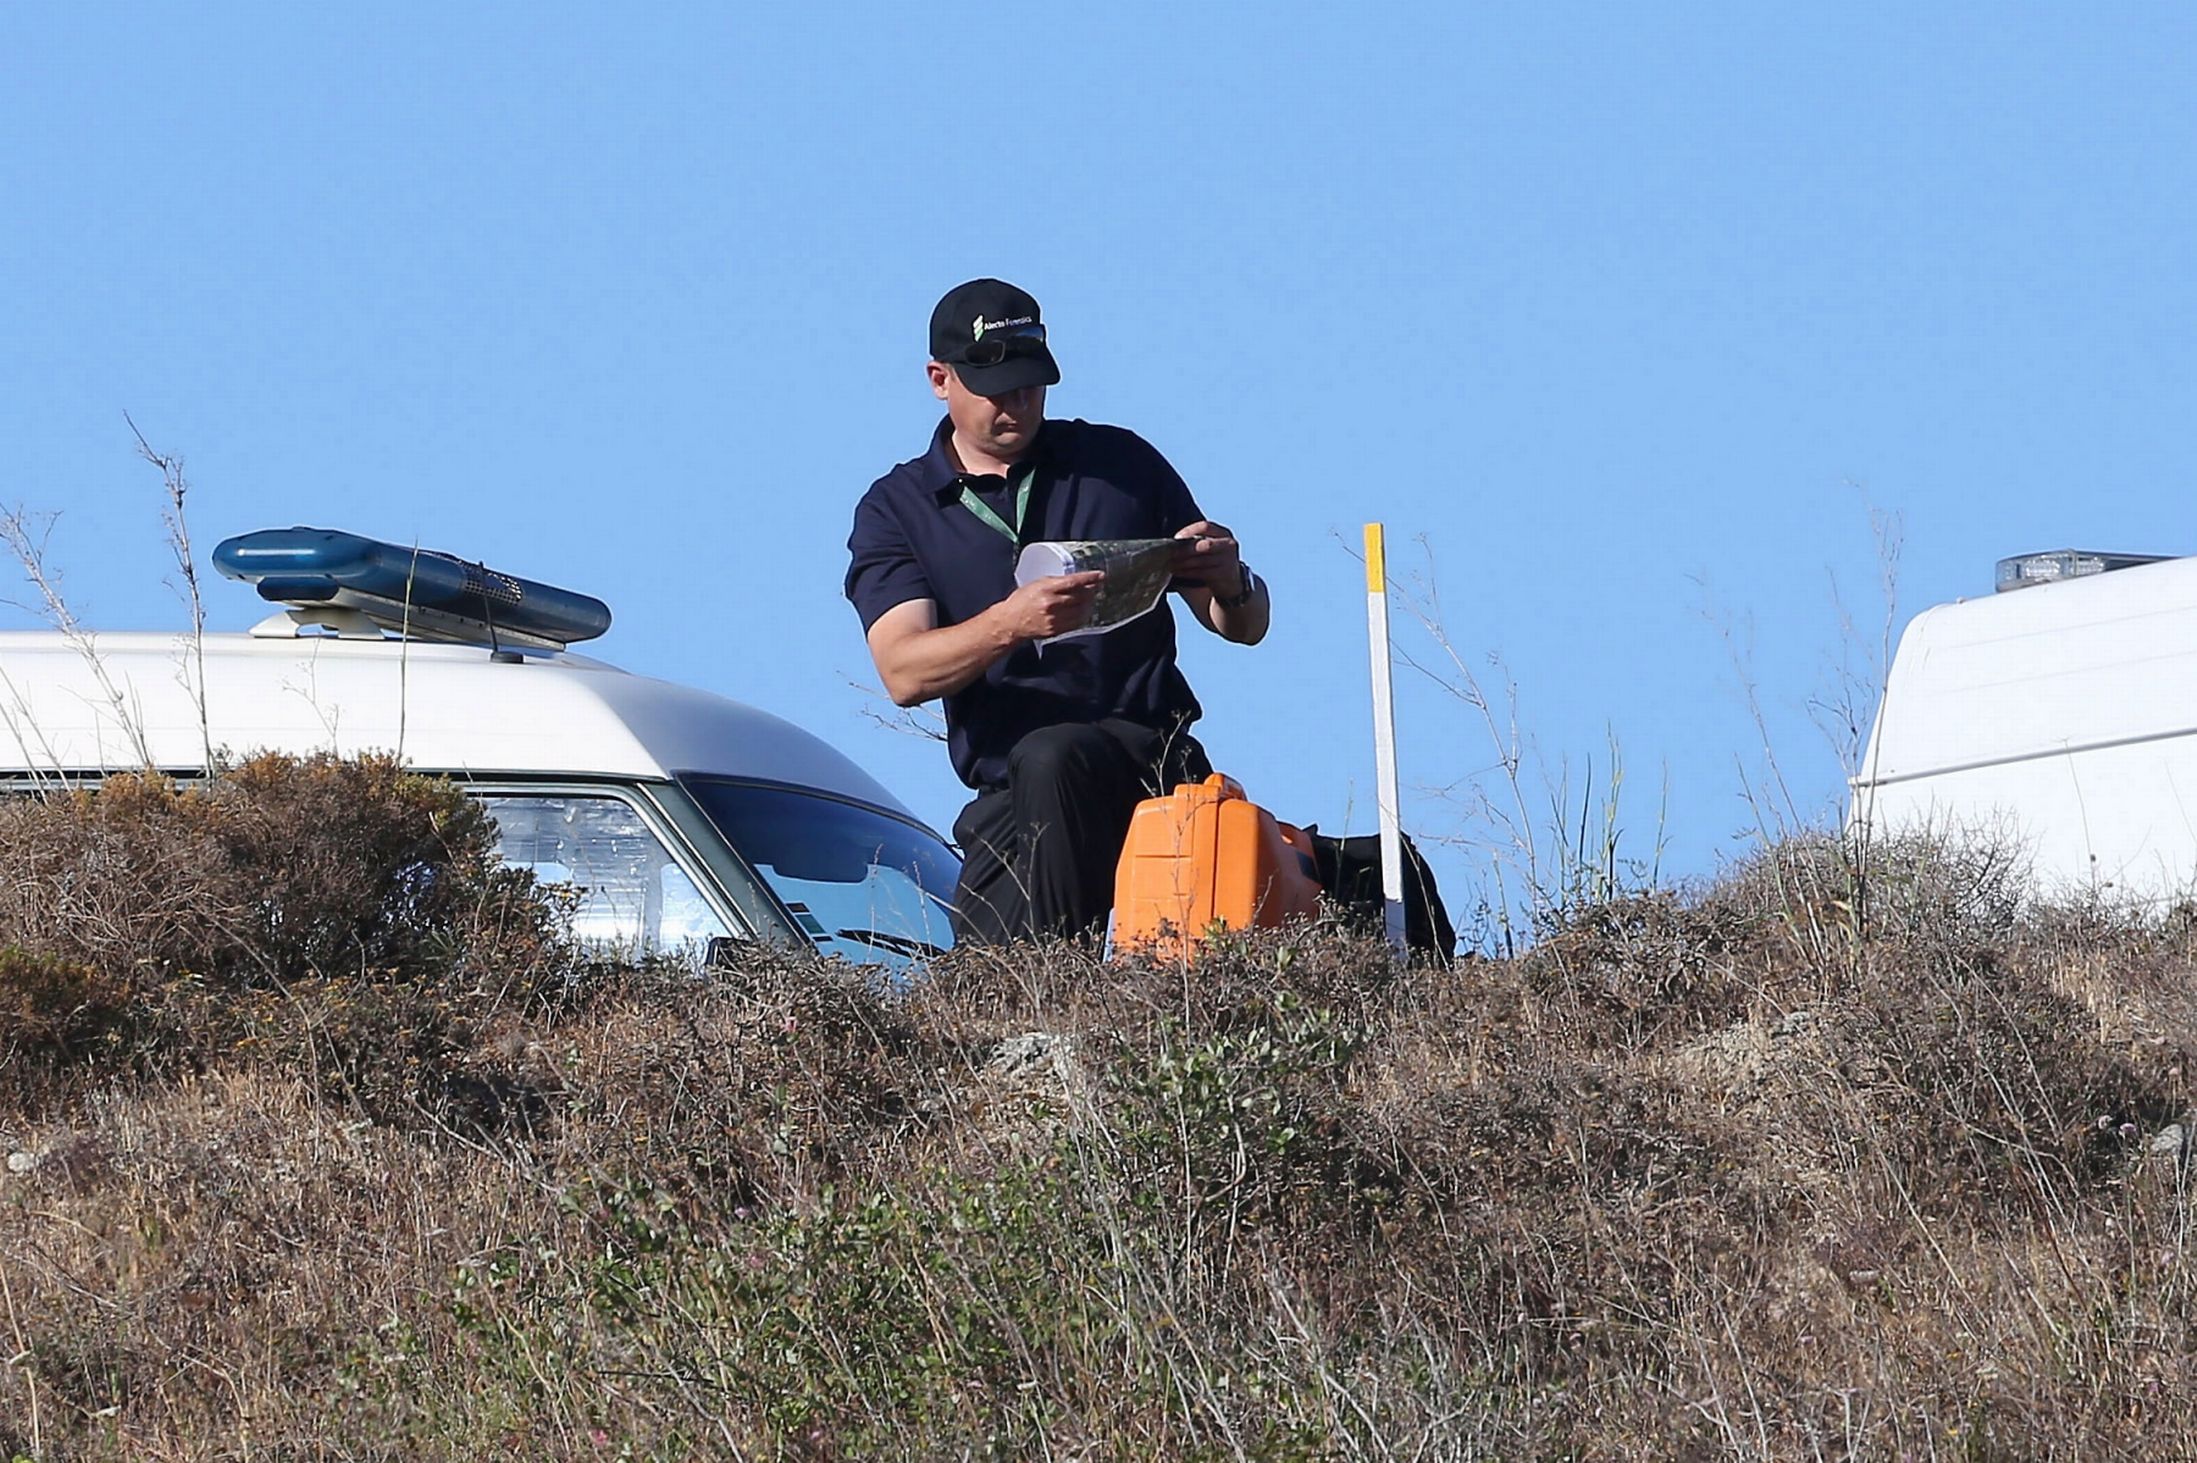 Welsh police officers and sniffer dogs involved in the search for April Jones are in Portugal helping with the search for missing Madeleine McCann.